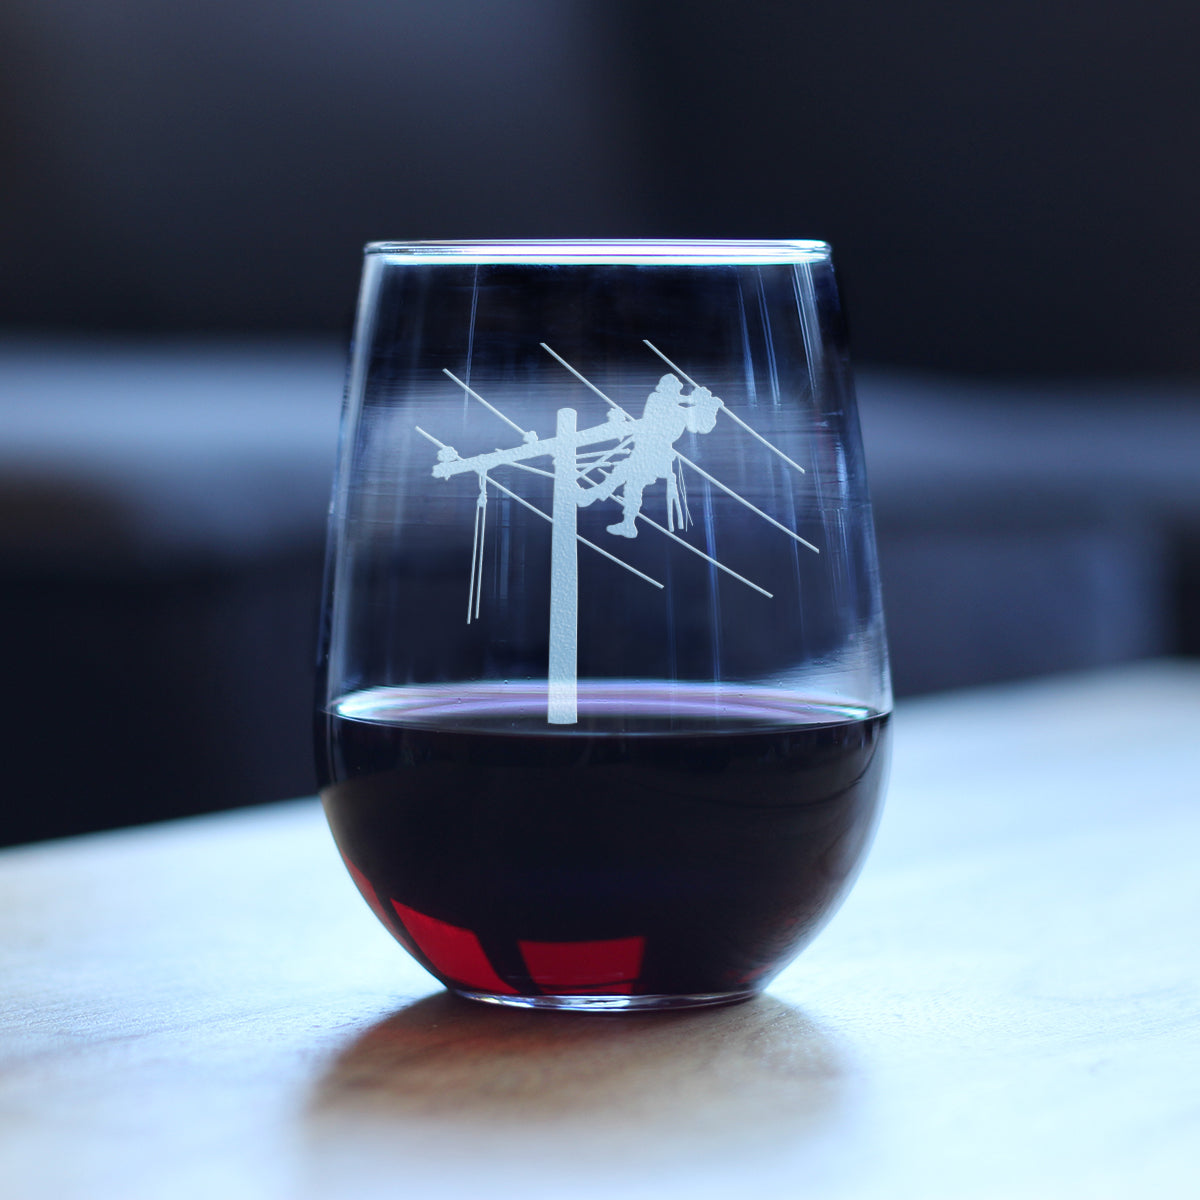 Lineworker Engraved Large Stemless Wine Glass, Unique Electrical Themed Gifts for Men and Women who are Lineworkers - 17 oz